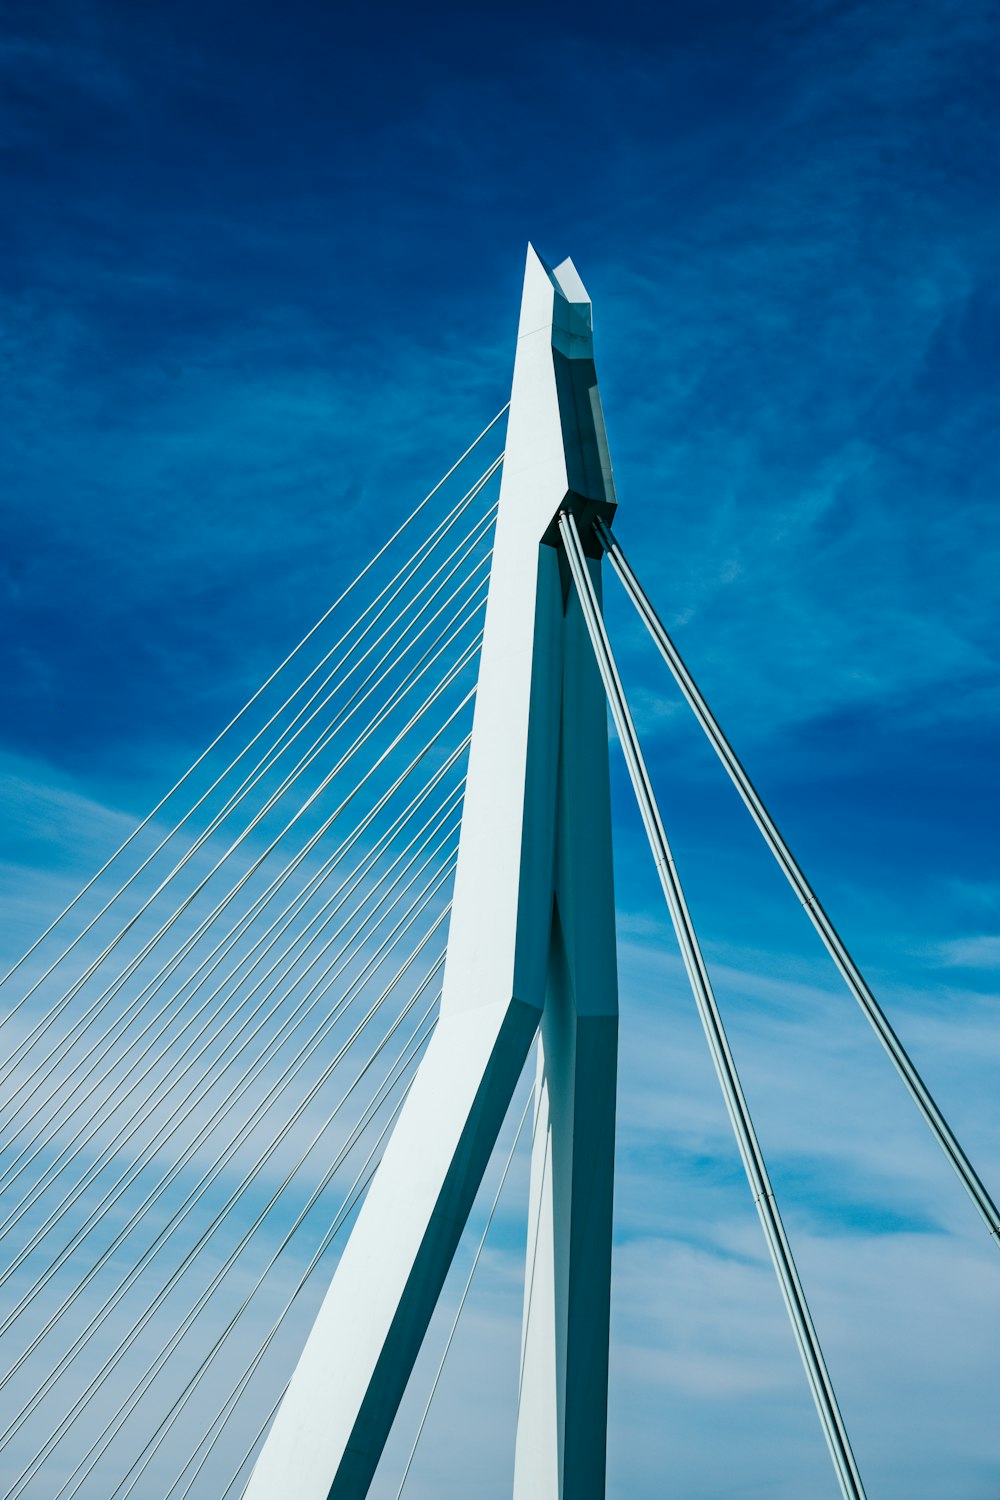 a tall white bridge with a blue sky in the background